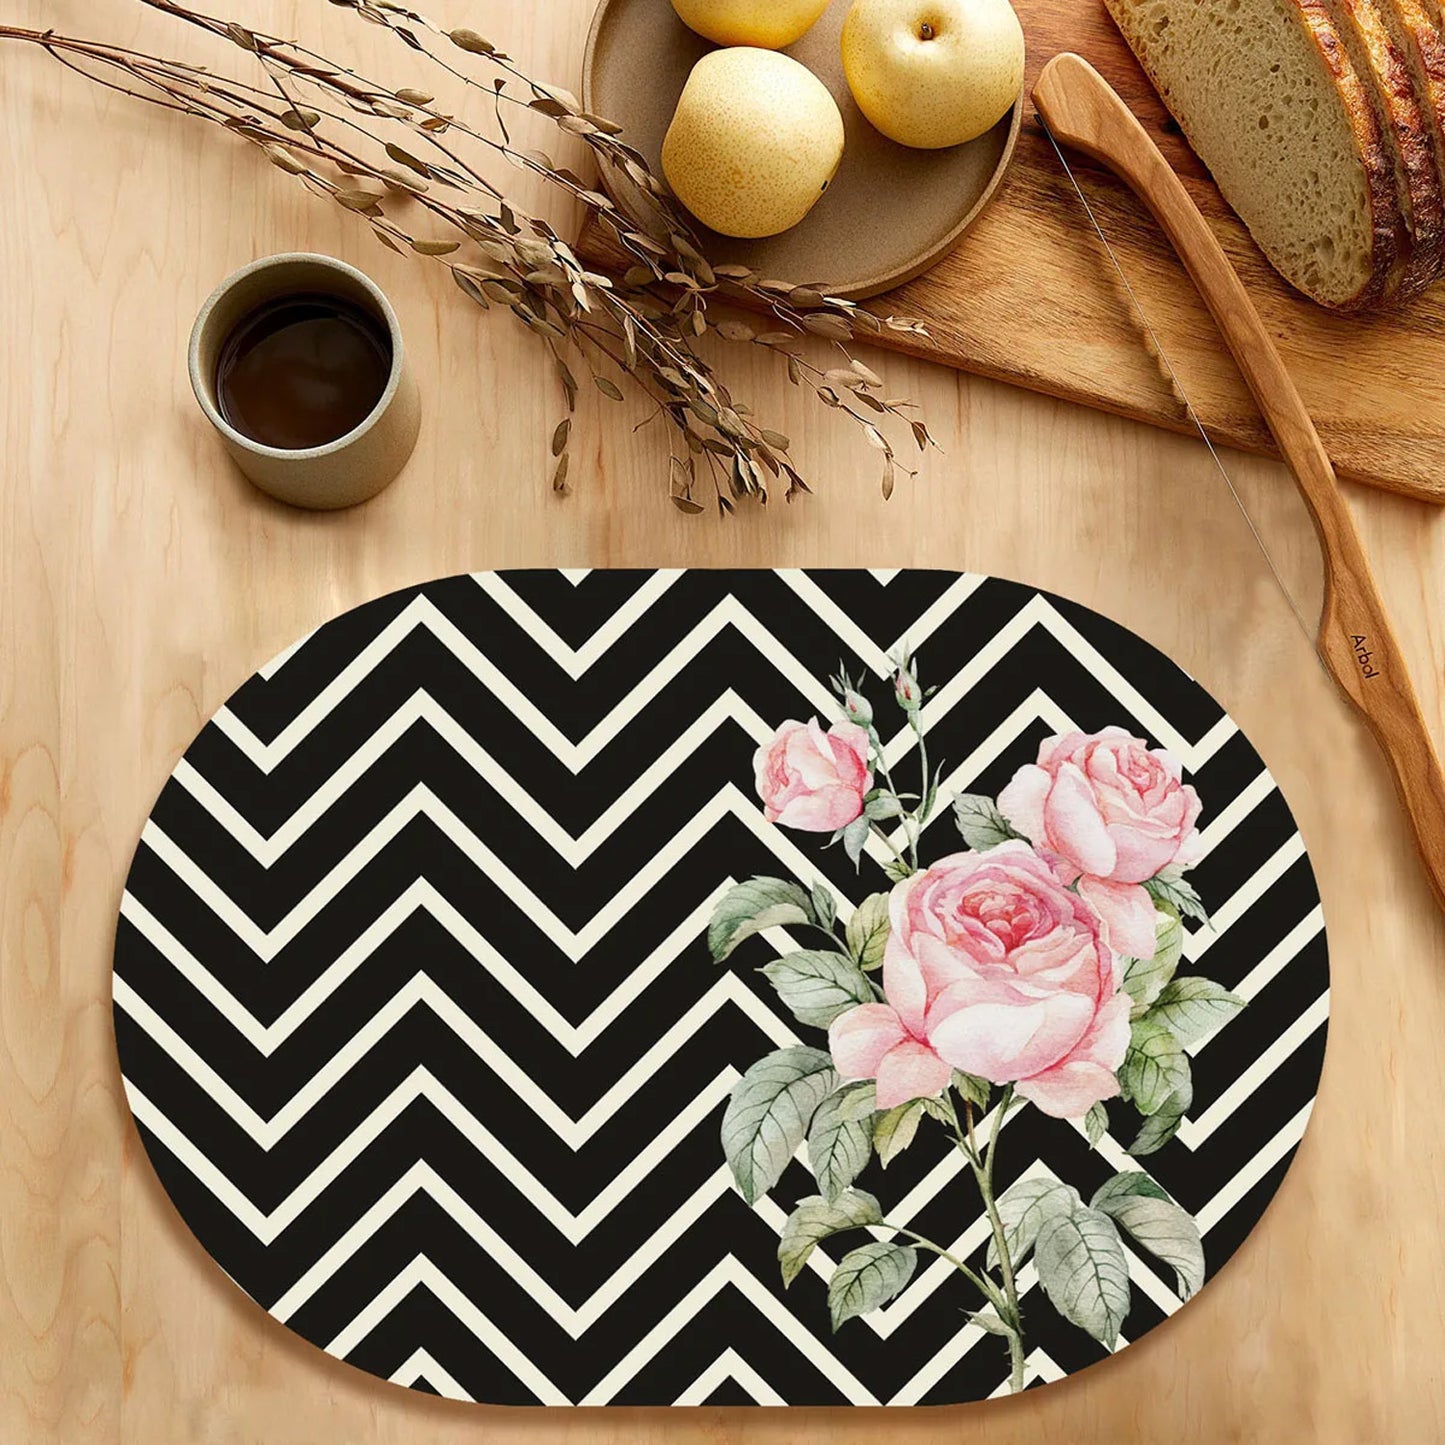 Roses On chevron Background Tablemats | TM 082 (set of 2)